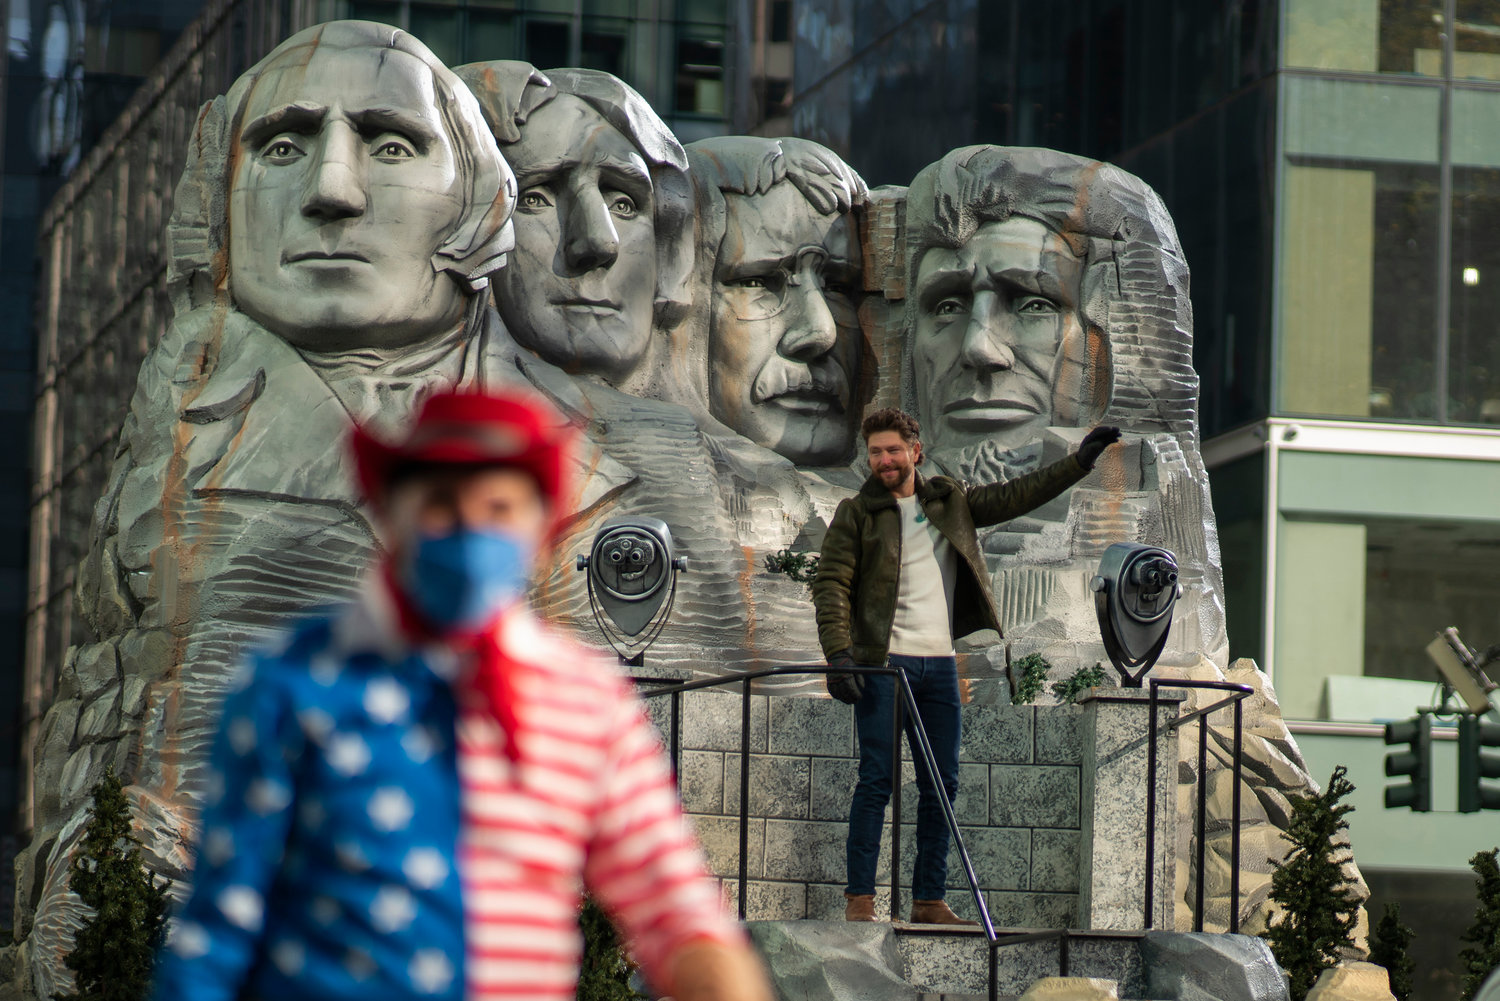 LANDMARK FLOAT — Chris Lane rides on a Mount Rushmore themed float during the Macy’s Thanksgiving Day Parade Thursday in New York.